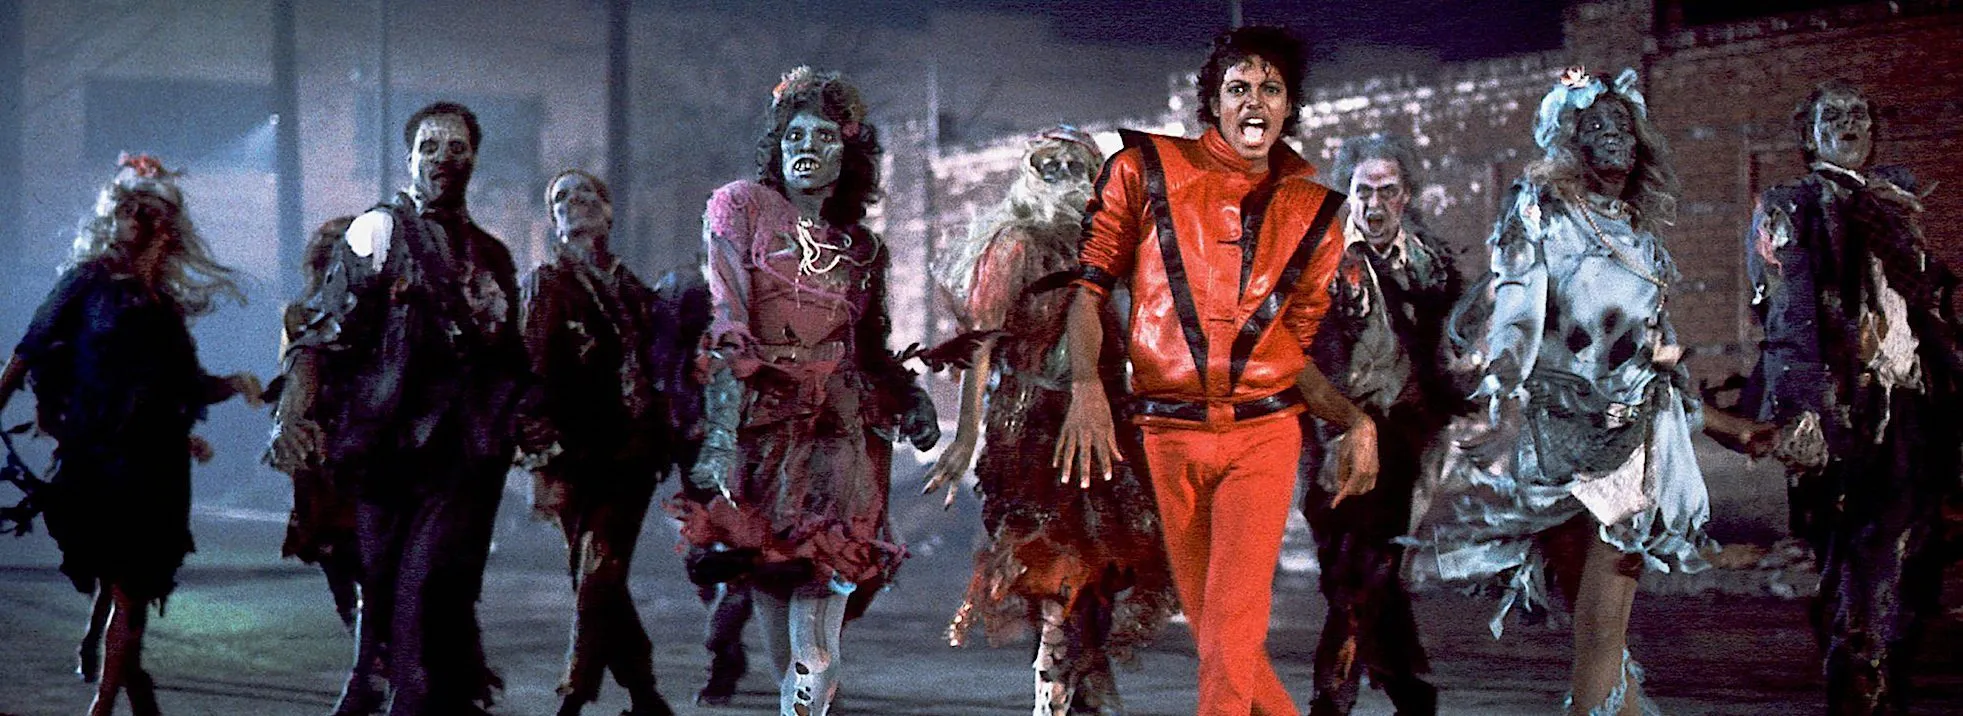 Behind the Song Lyrics of “Thriller” by Michael Jackson